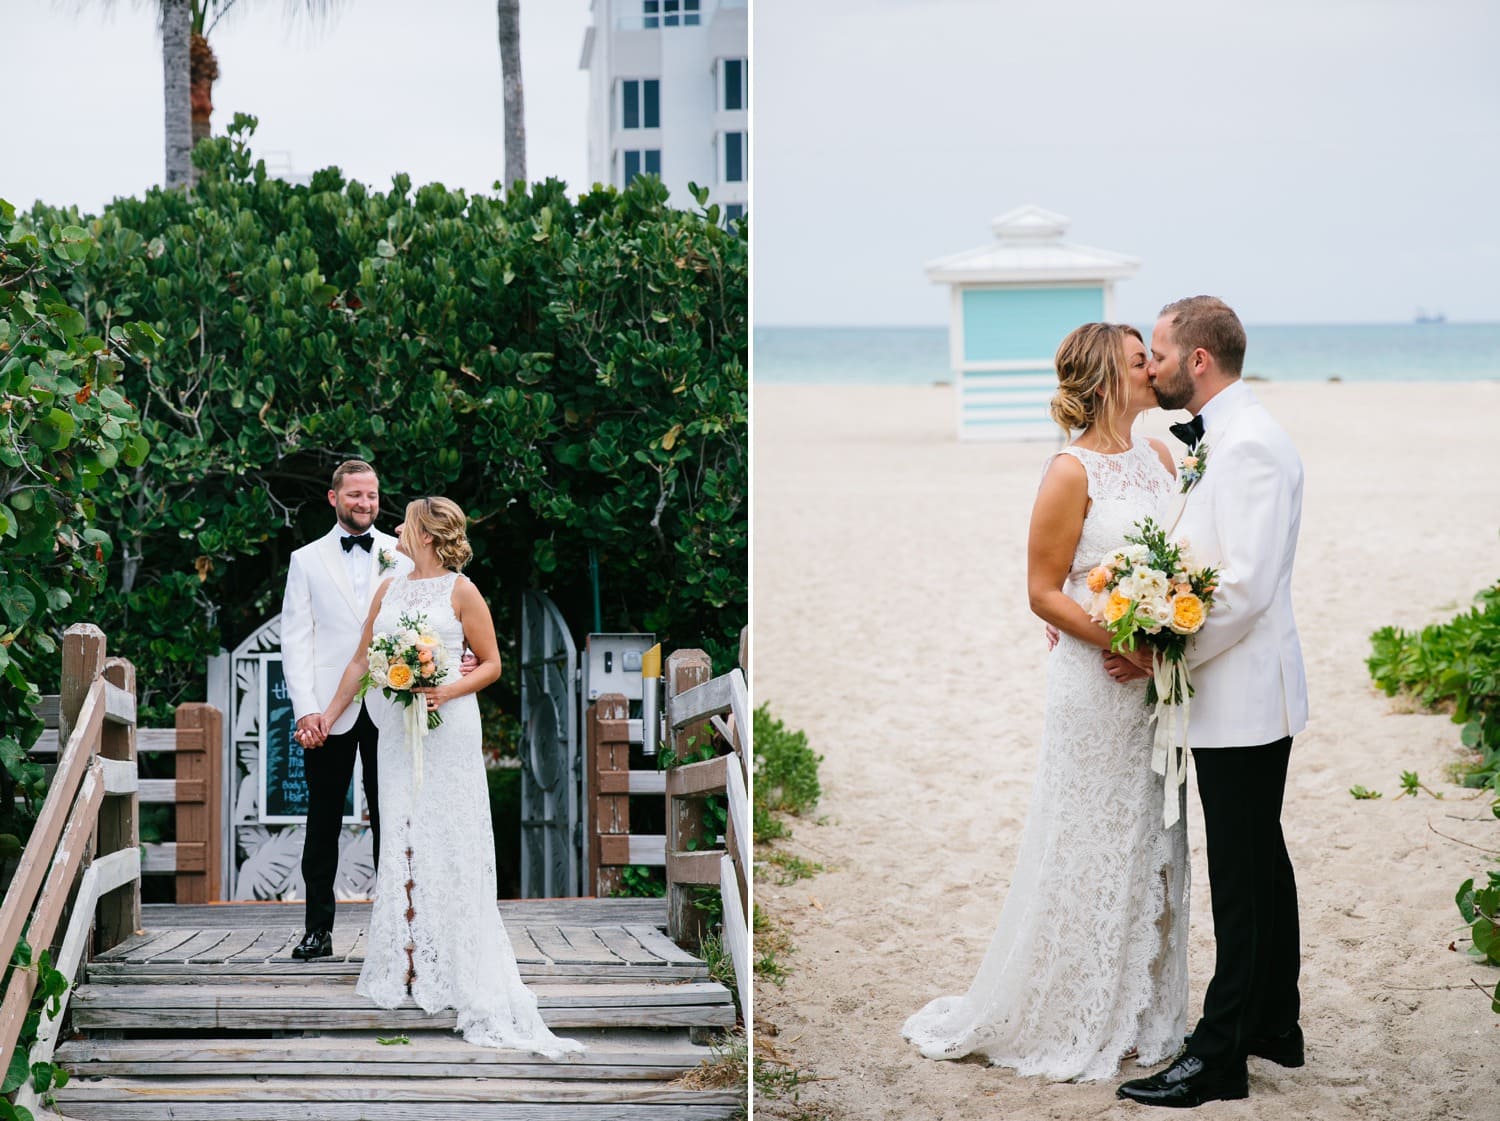 Beautiful tropical wedding at the Palms Hotel Miami